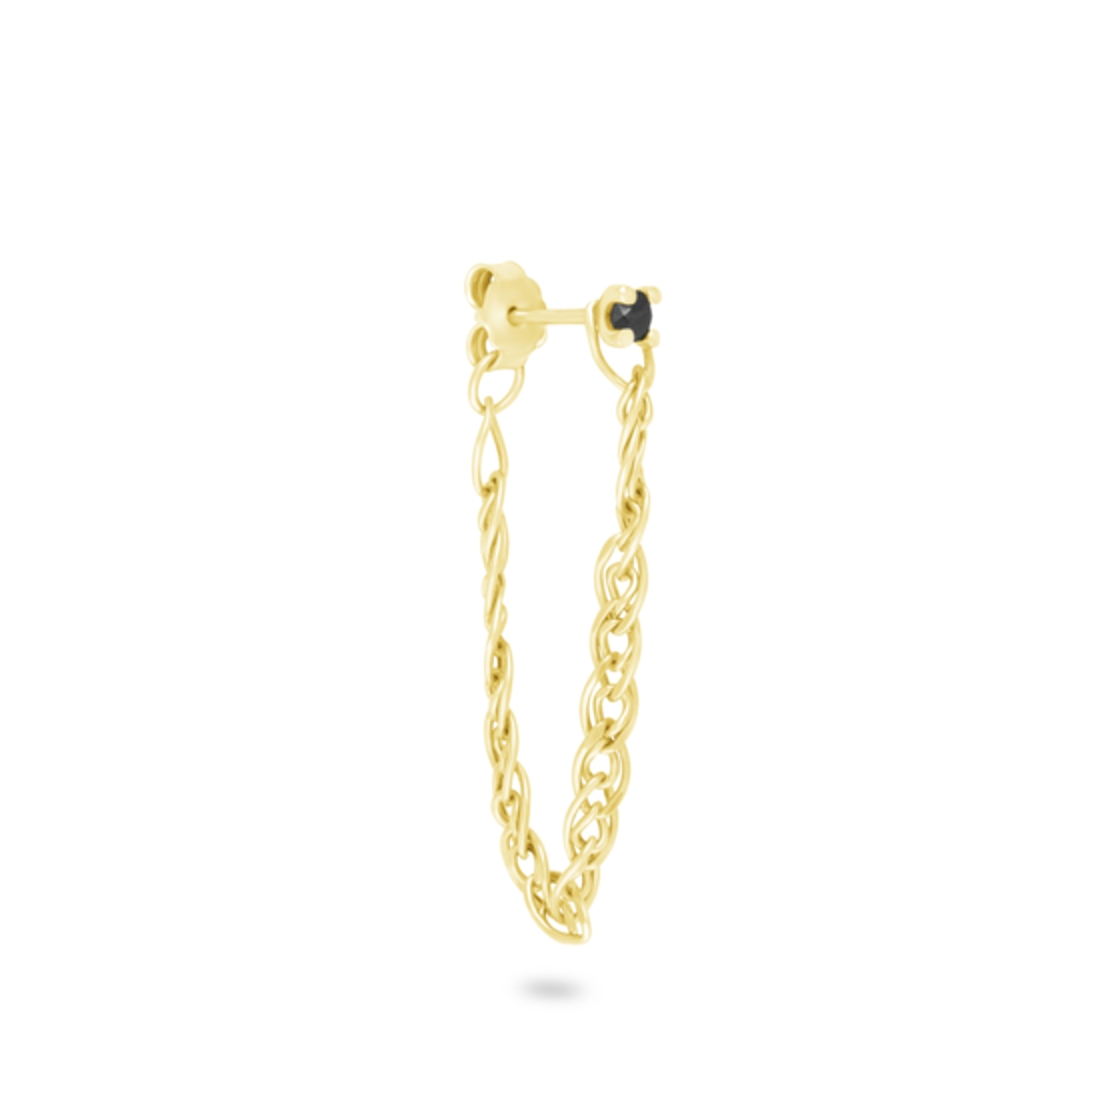 Lee-Tal | Gold Earring with Black Diamond